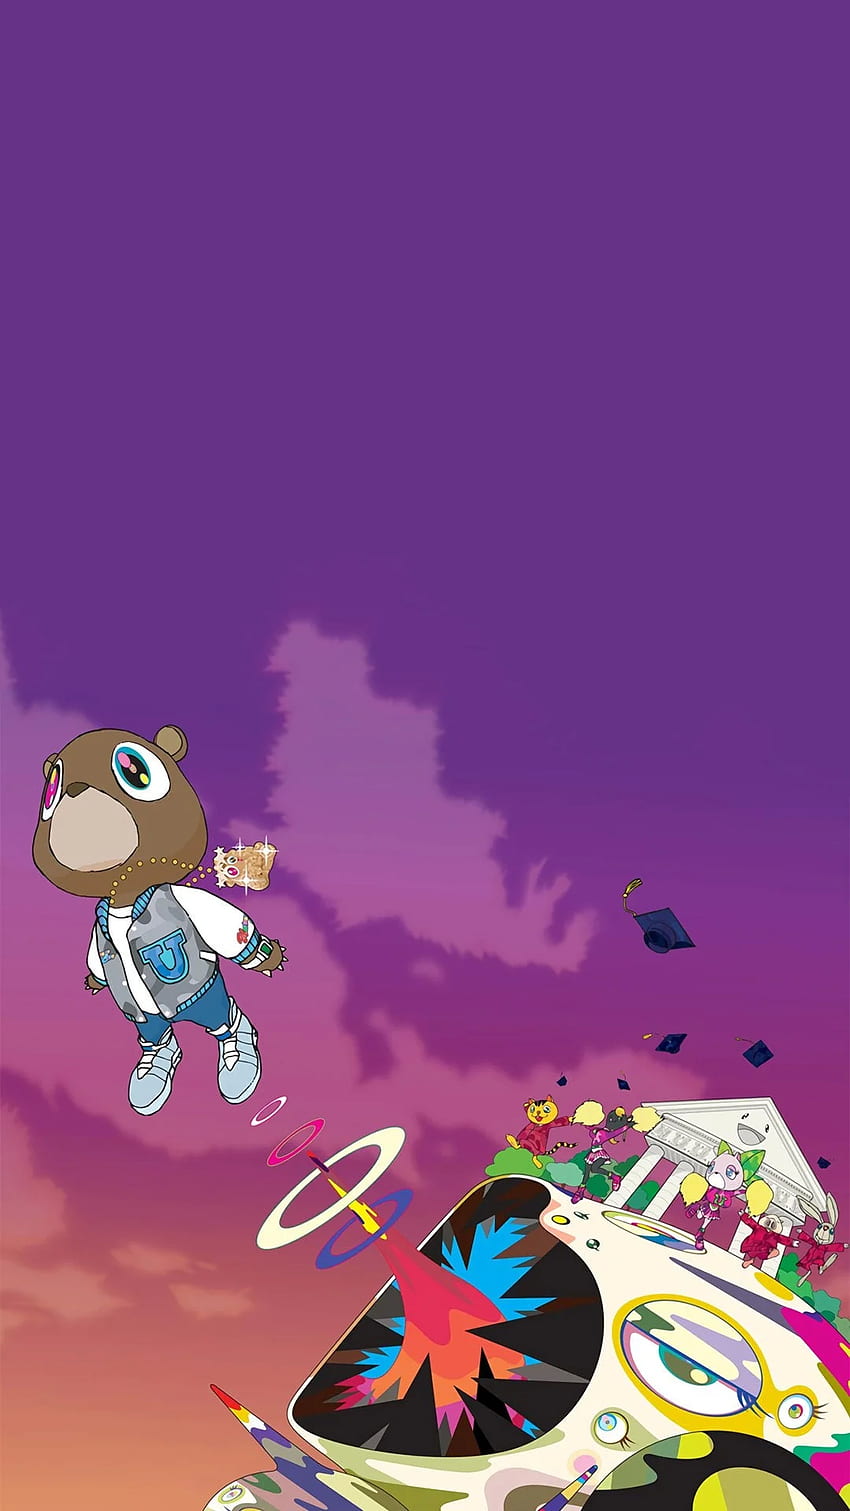 I Made This Graduation For Your Phone! : R Kanye, Kanye West Graduation iPhone HD phone wallpaper